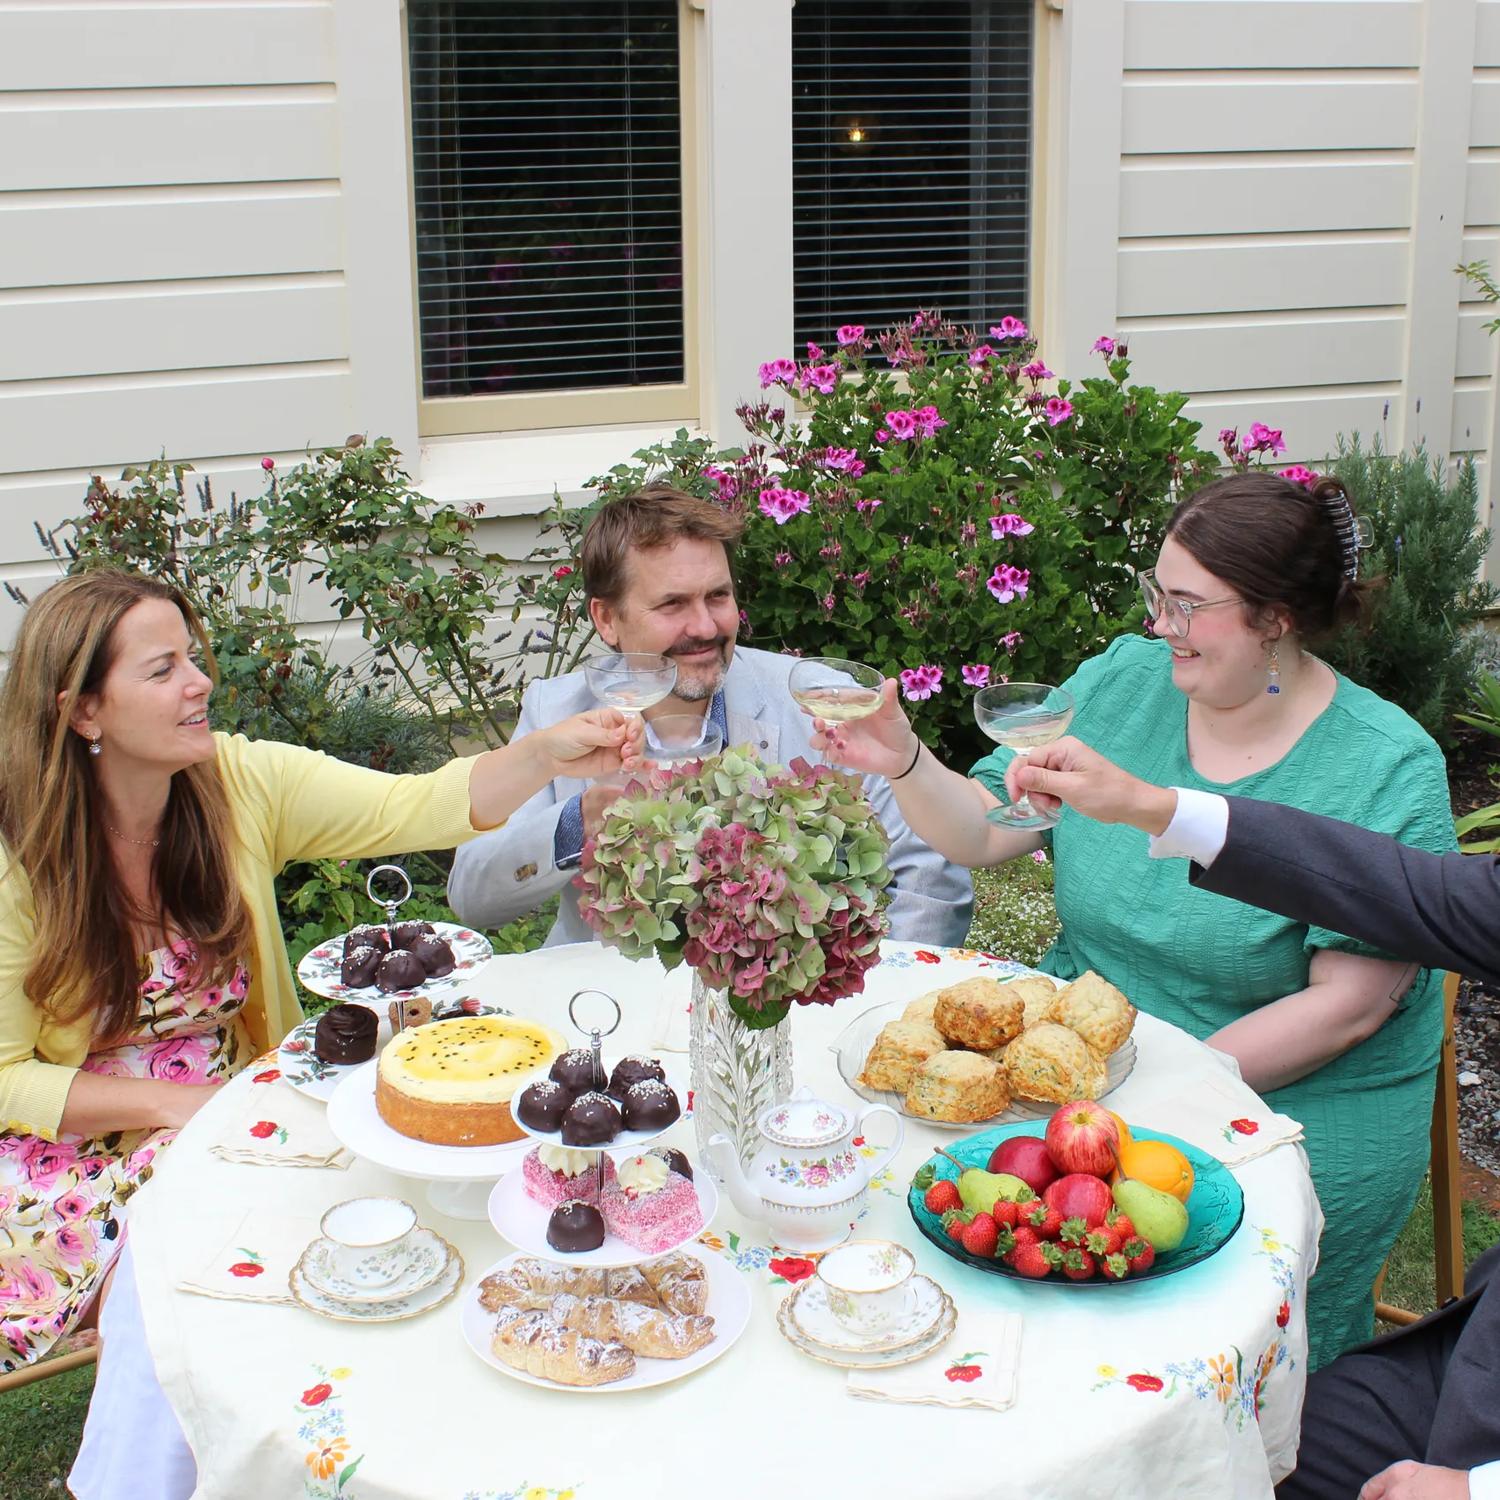 Four people make a toast with coup glasses and sit around a round table with fruits, desserts and a flower vase.